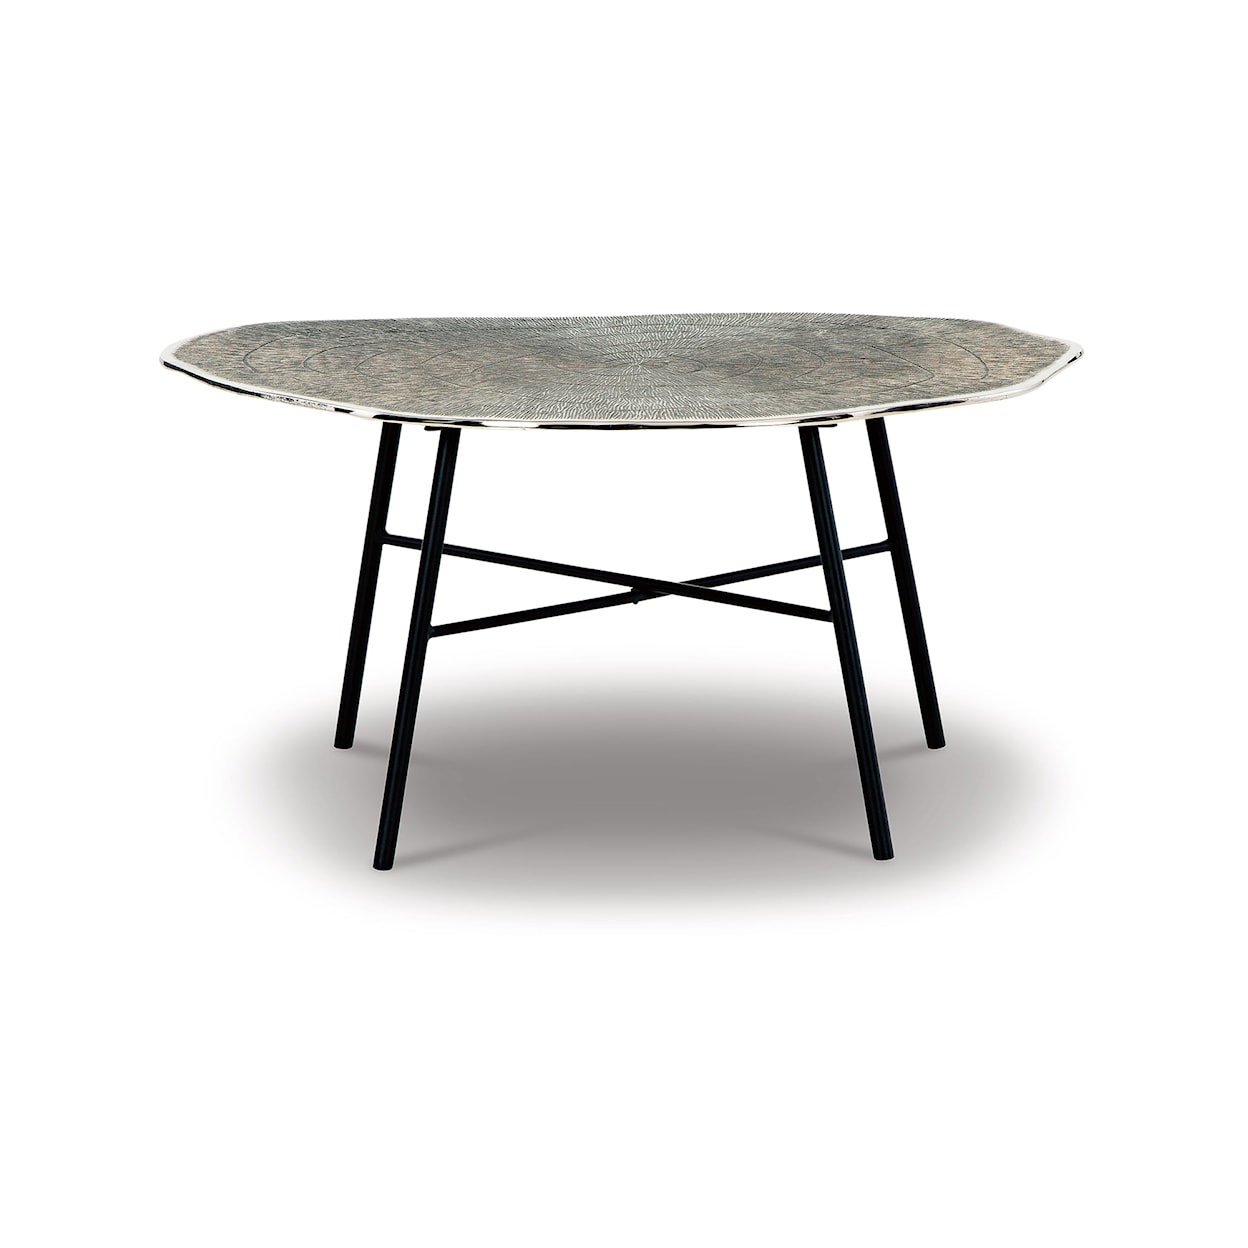 Benchcraft Laverford Oval Cocktail Table